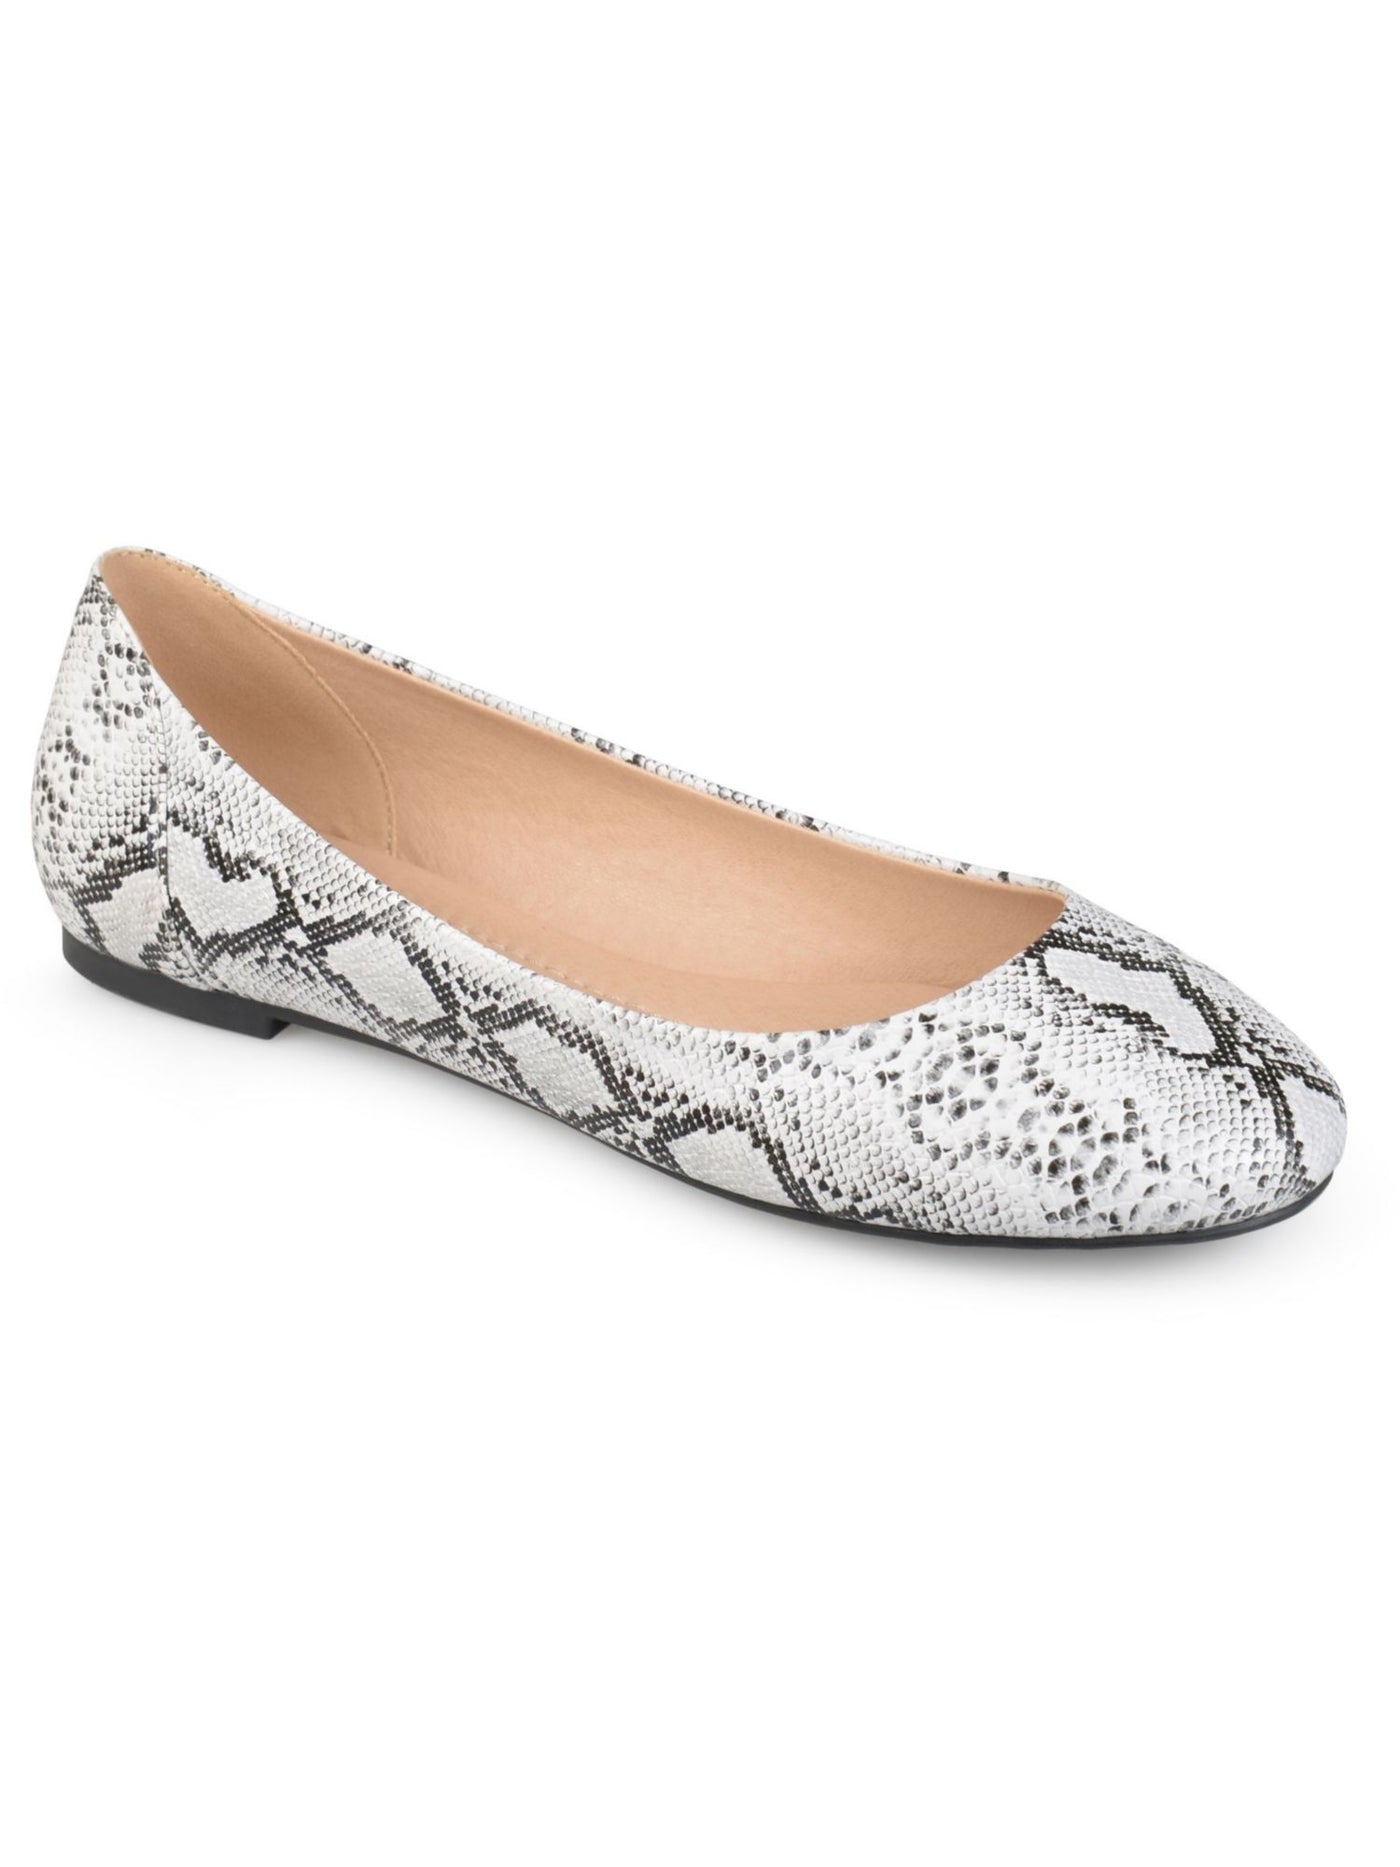 JOURNEE COLLECTION Womens Gray Snake Cushioned Kavn Round Toe Slip On Ballet Flats 9